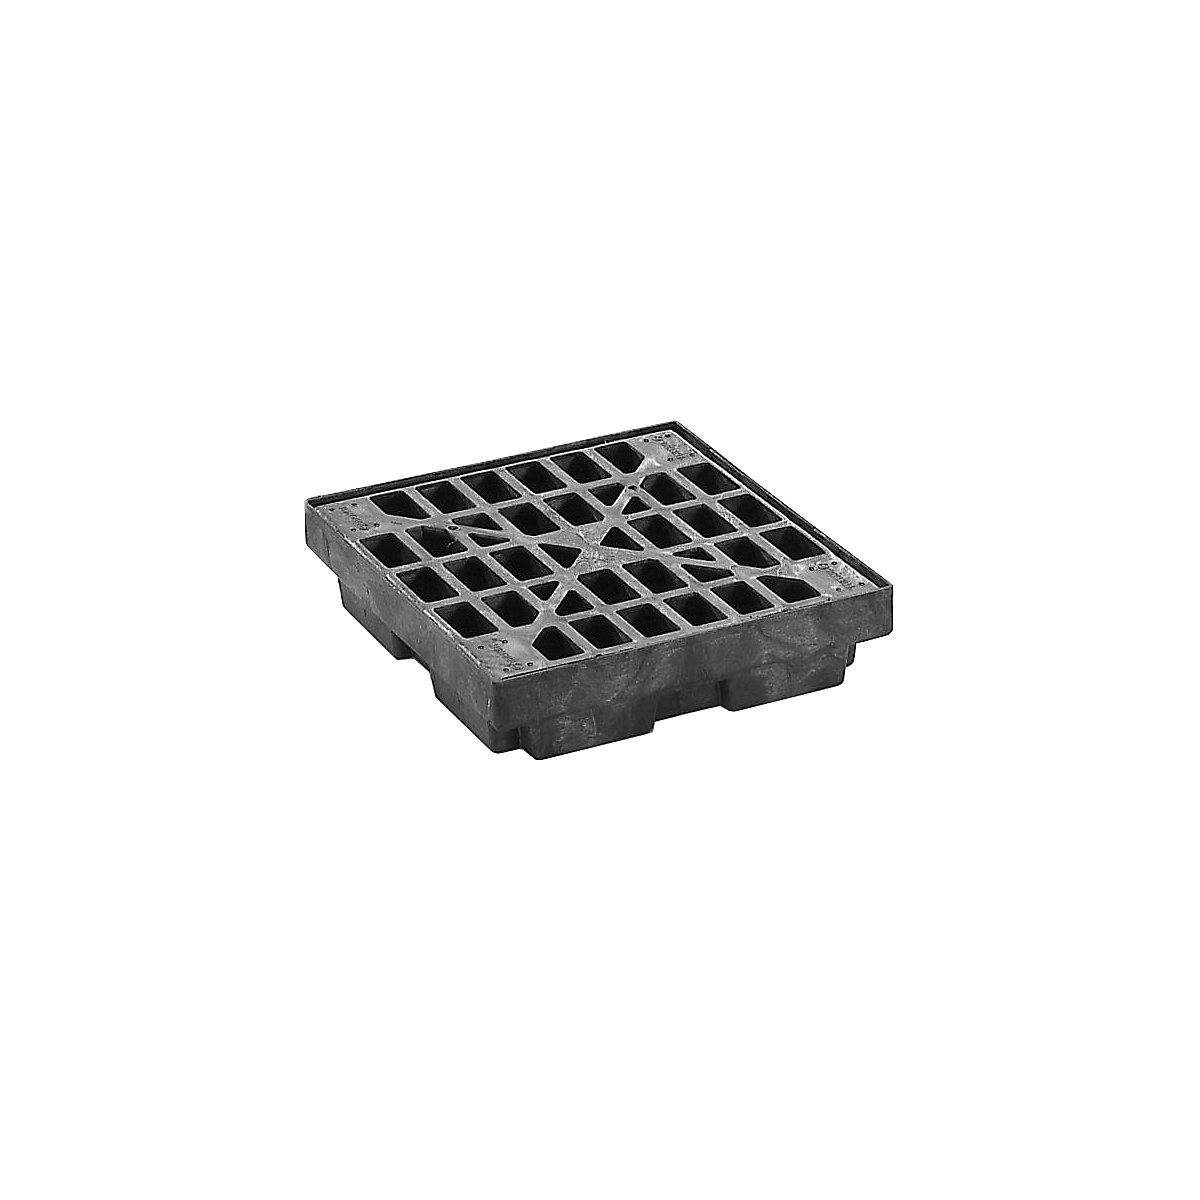 PE sump tray made of recycled PE – Justrite